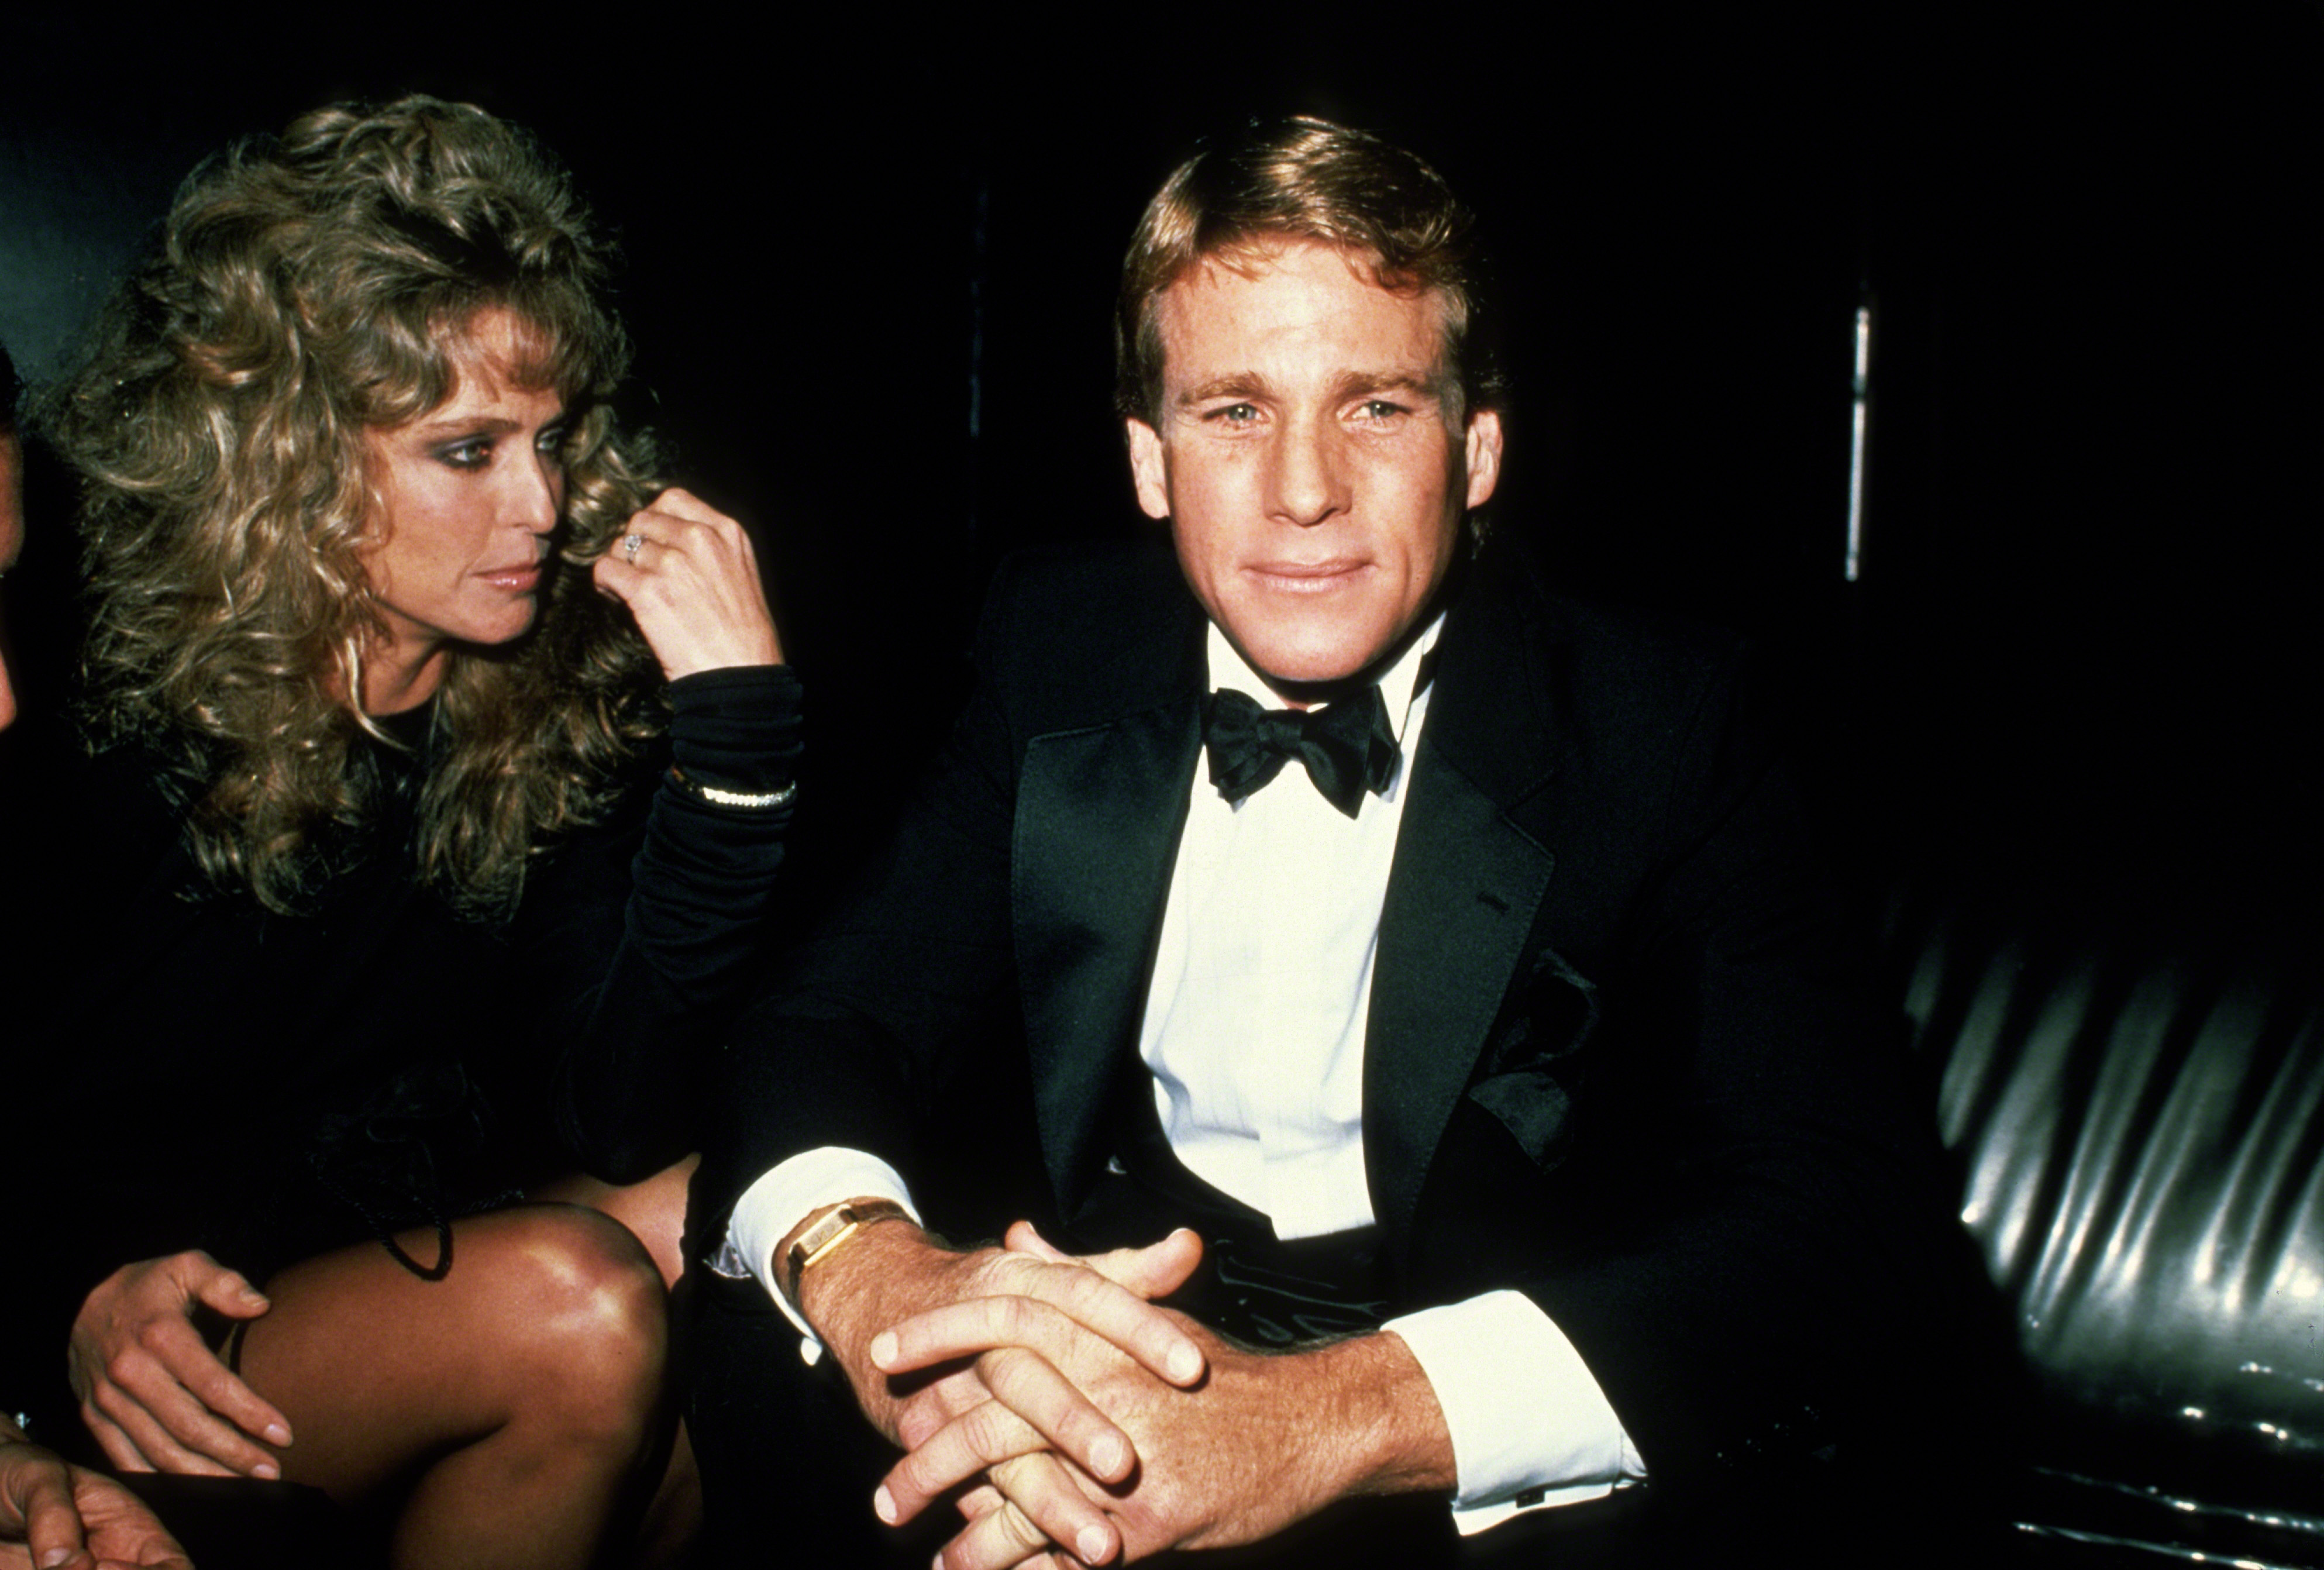 Farrah Fawcett and Ryan O'Neal circa 1981 in New York City | Source: Getty Images